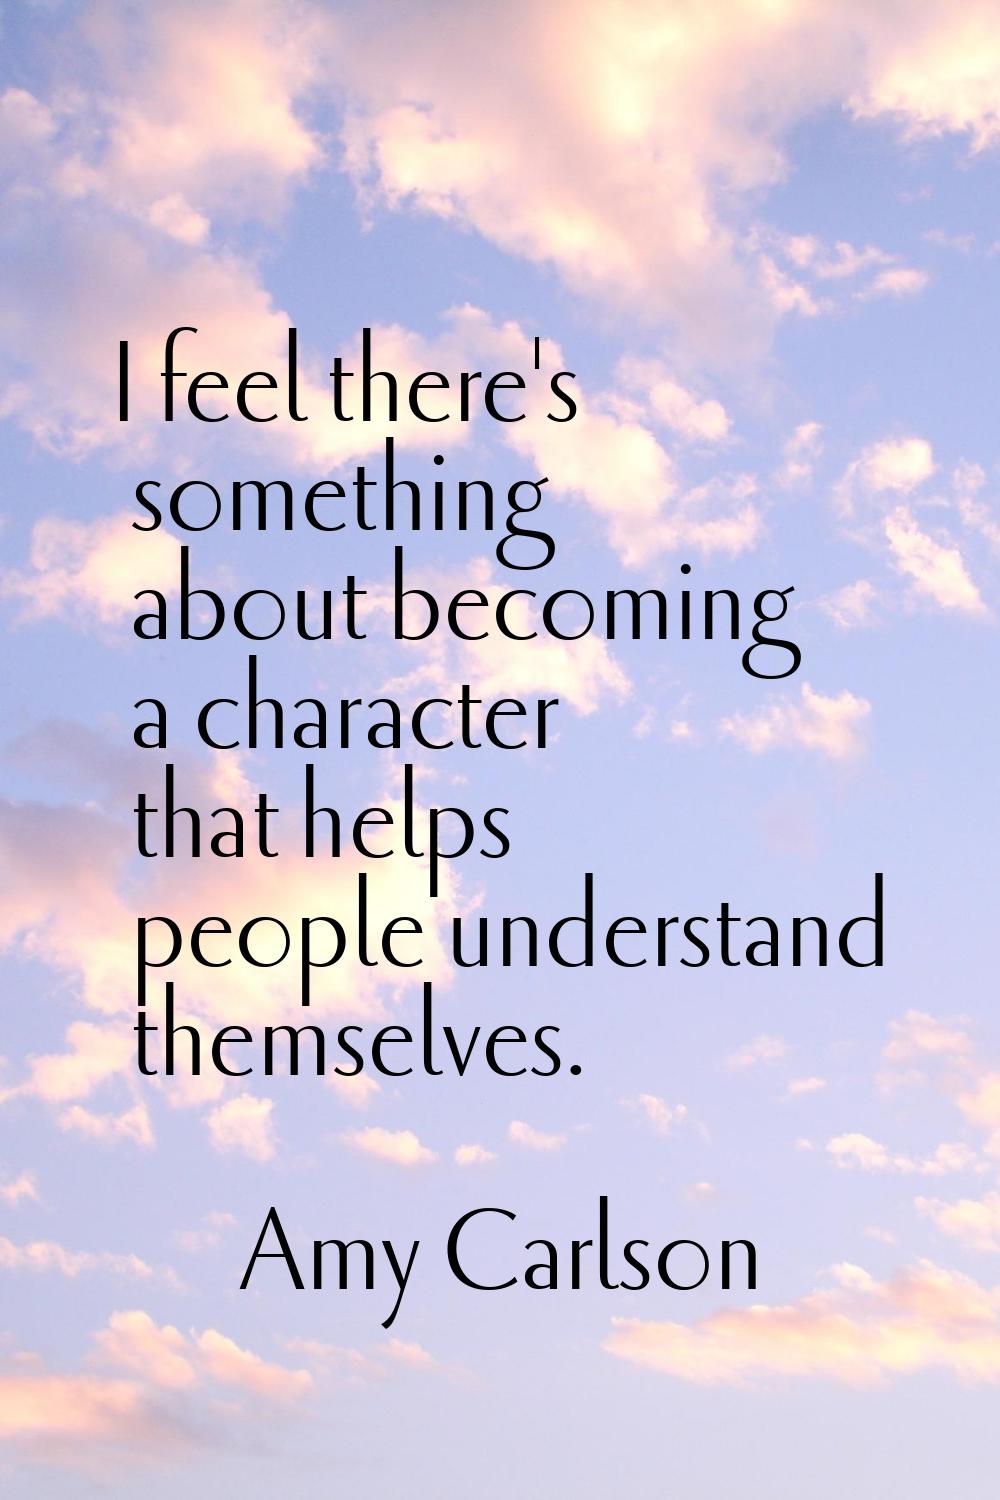 I feel there's something about becoming a character that helps people understand themselves.